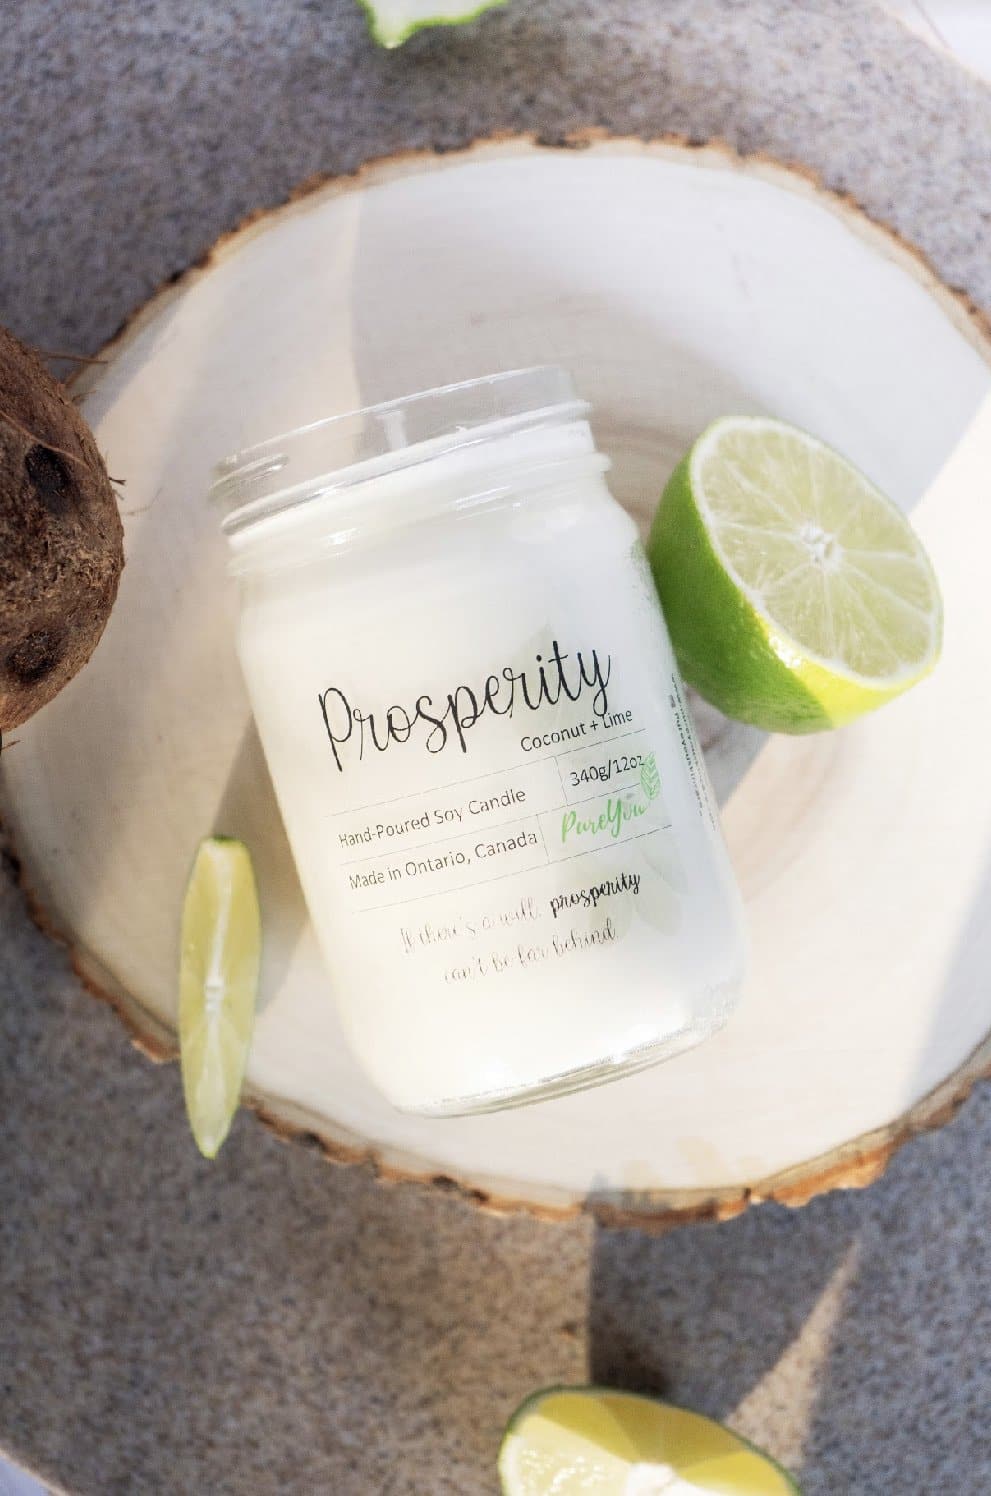 Prosperity Soy Wax Candle (Coconut+Lime)